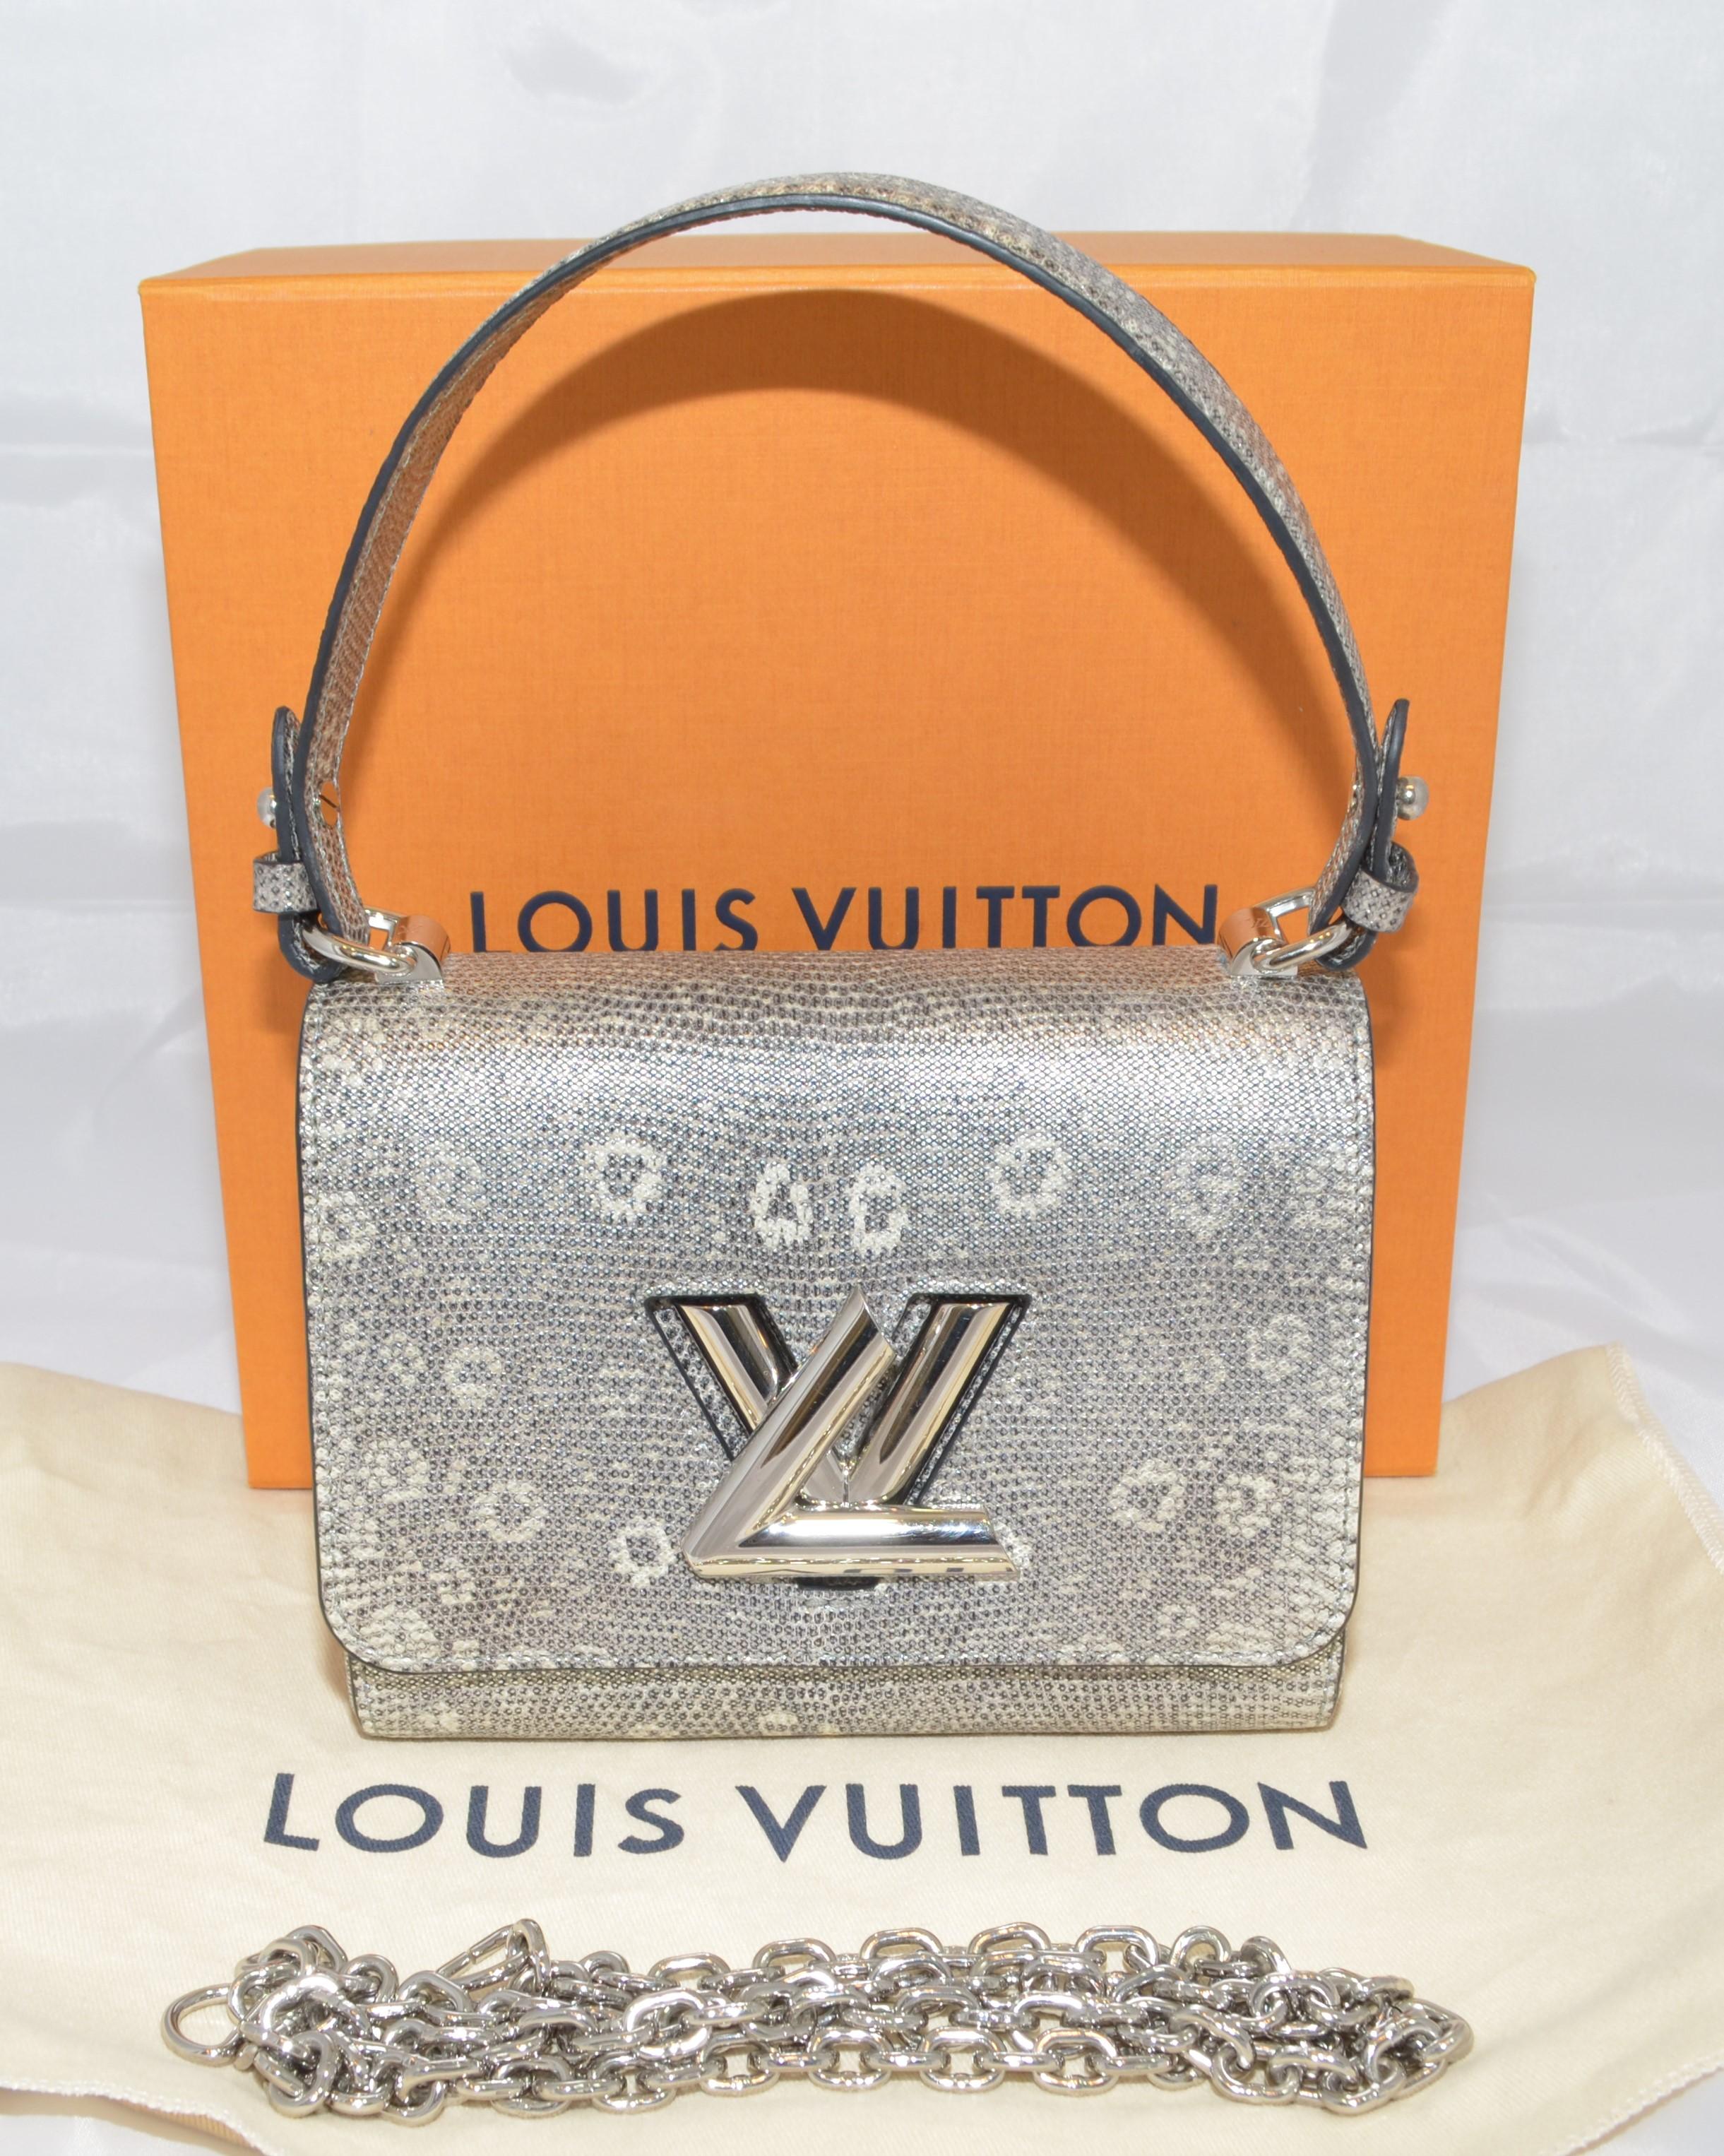 Louis Vuitton Twist PM bag featured in a silver-colored lizard skin with a convertible top or chain handle with a twist LV closure. Interior is lined in black leather and has one slip pocket. Handbag is in wonderful pre-owned condition with the